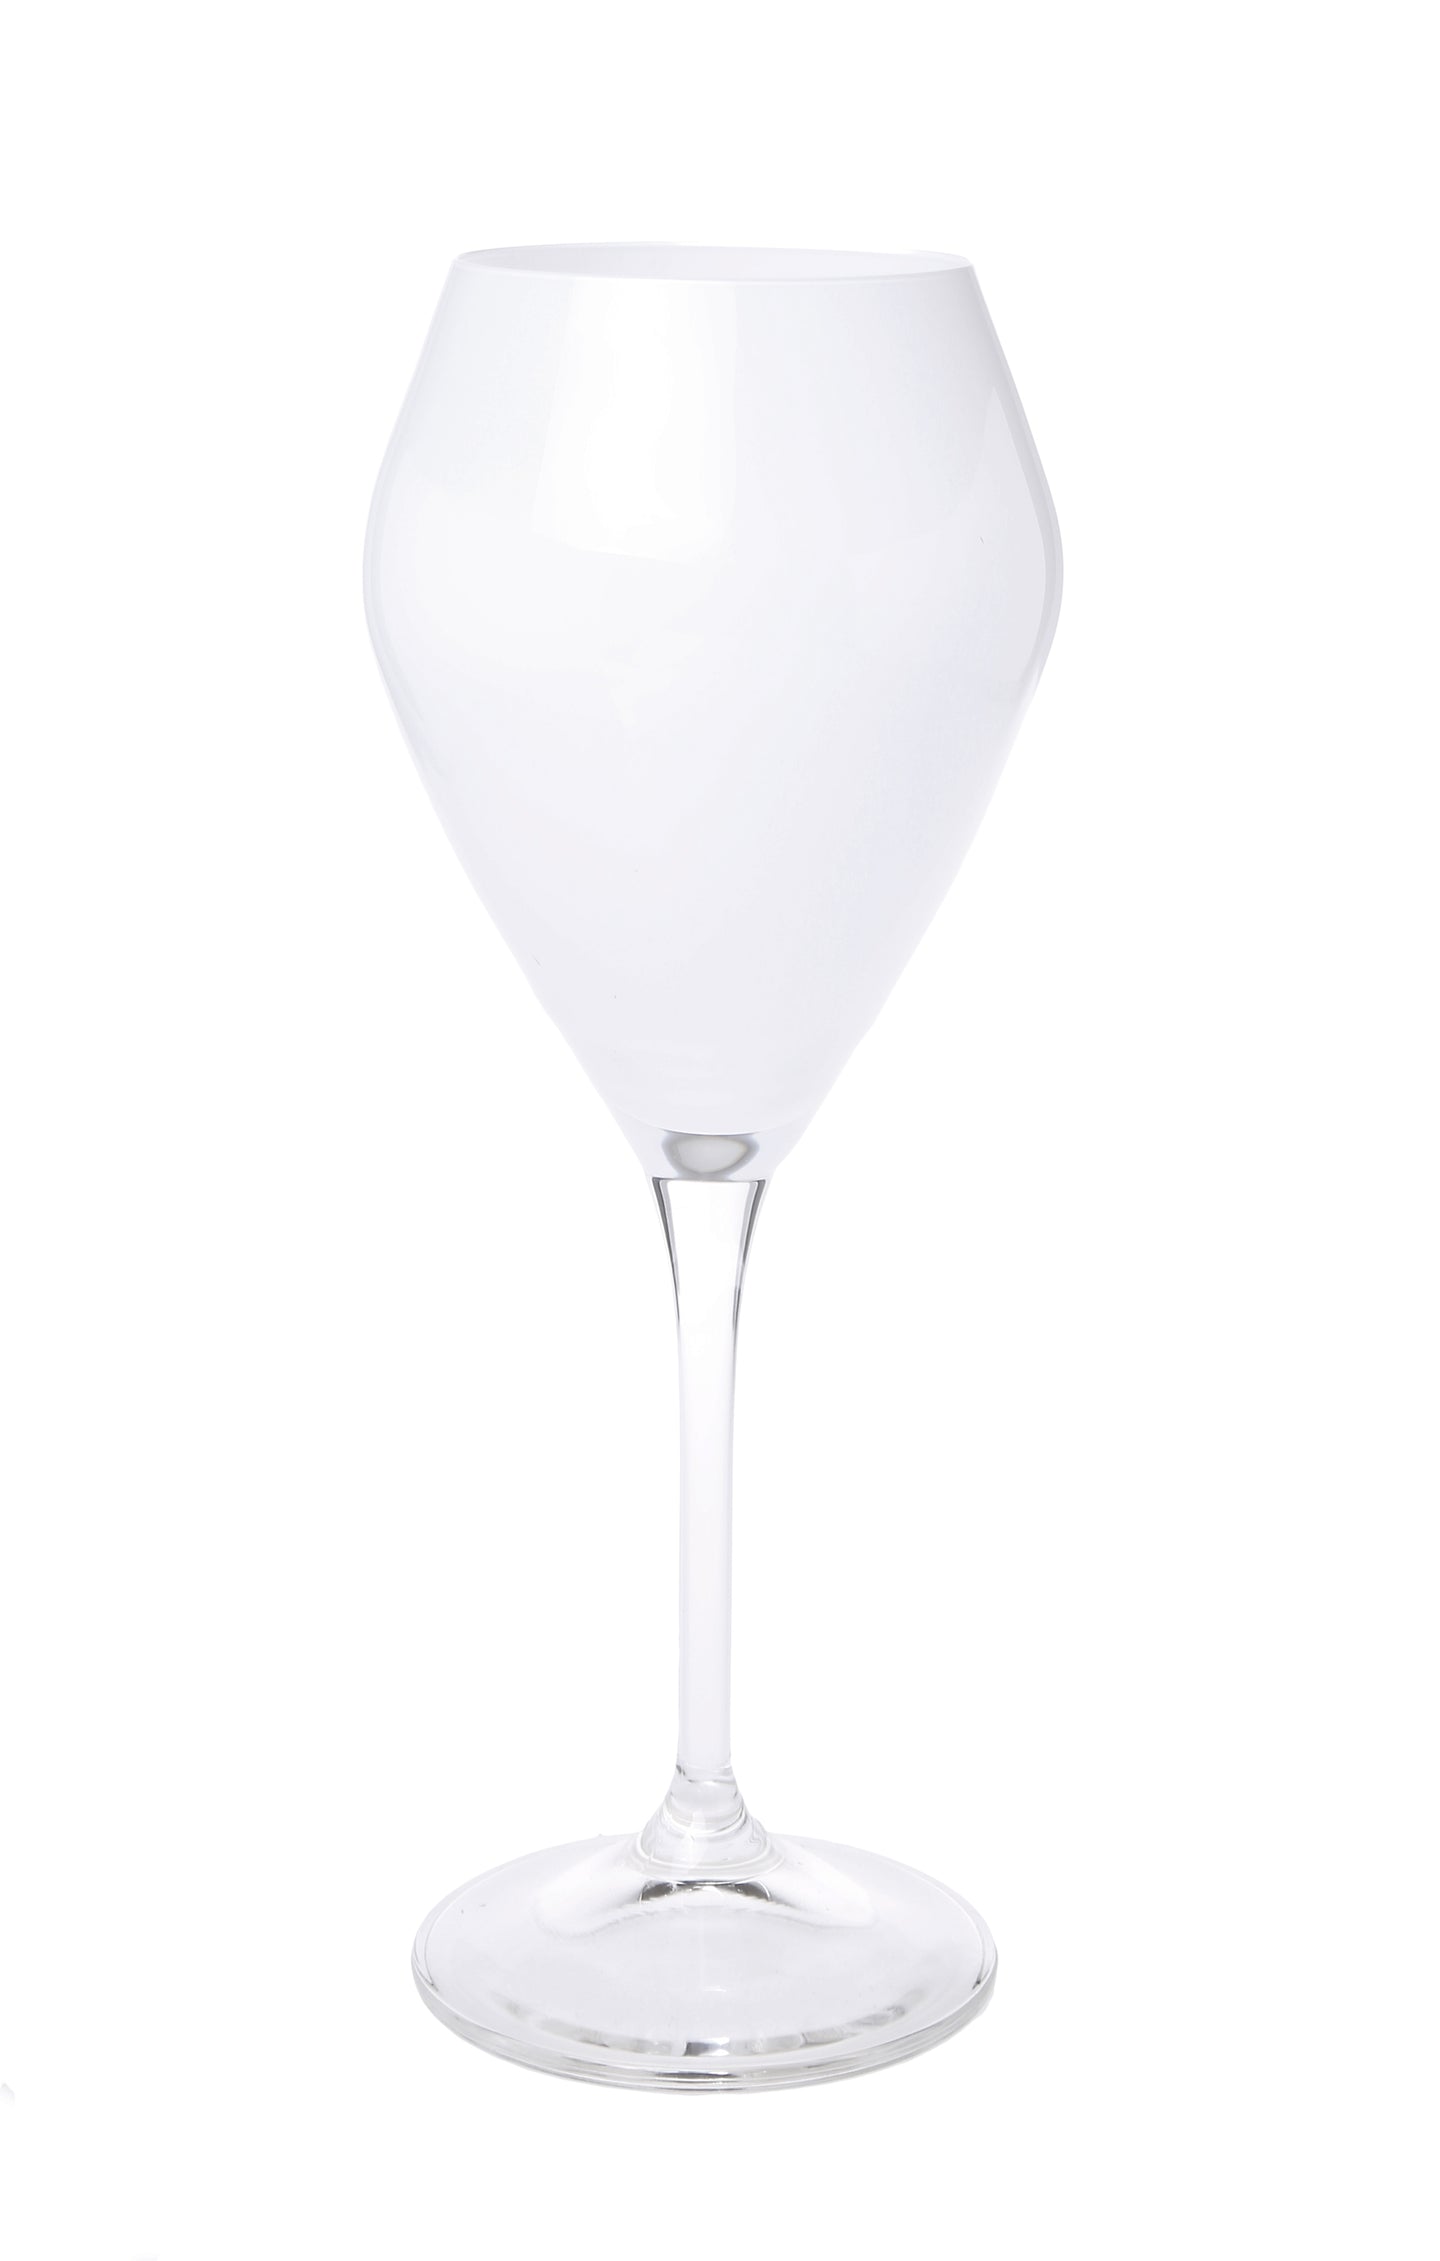 Set of 6 White V-Shaped Wine Glasses with Clear Stem – Classic